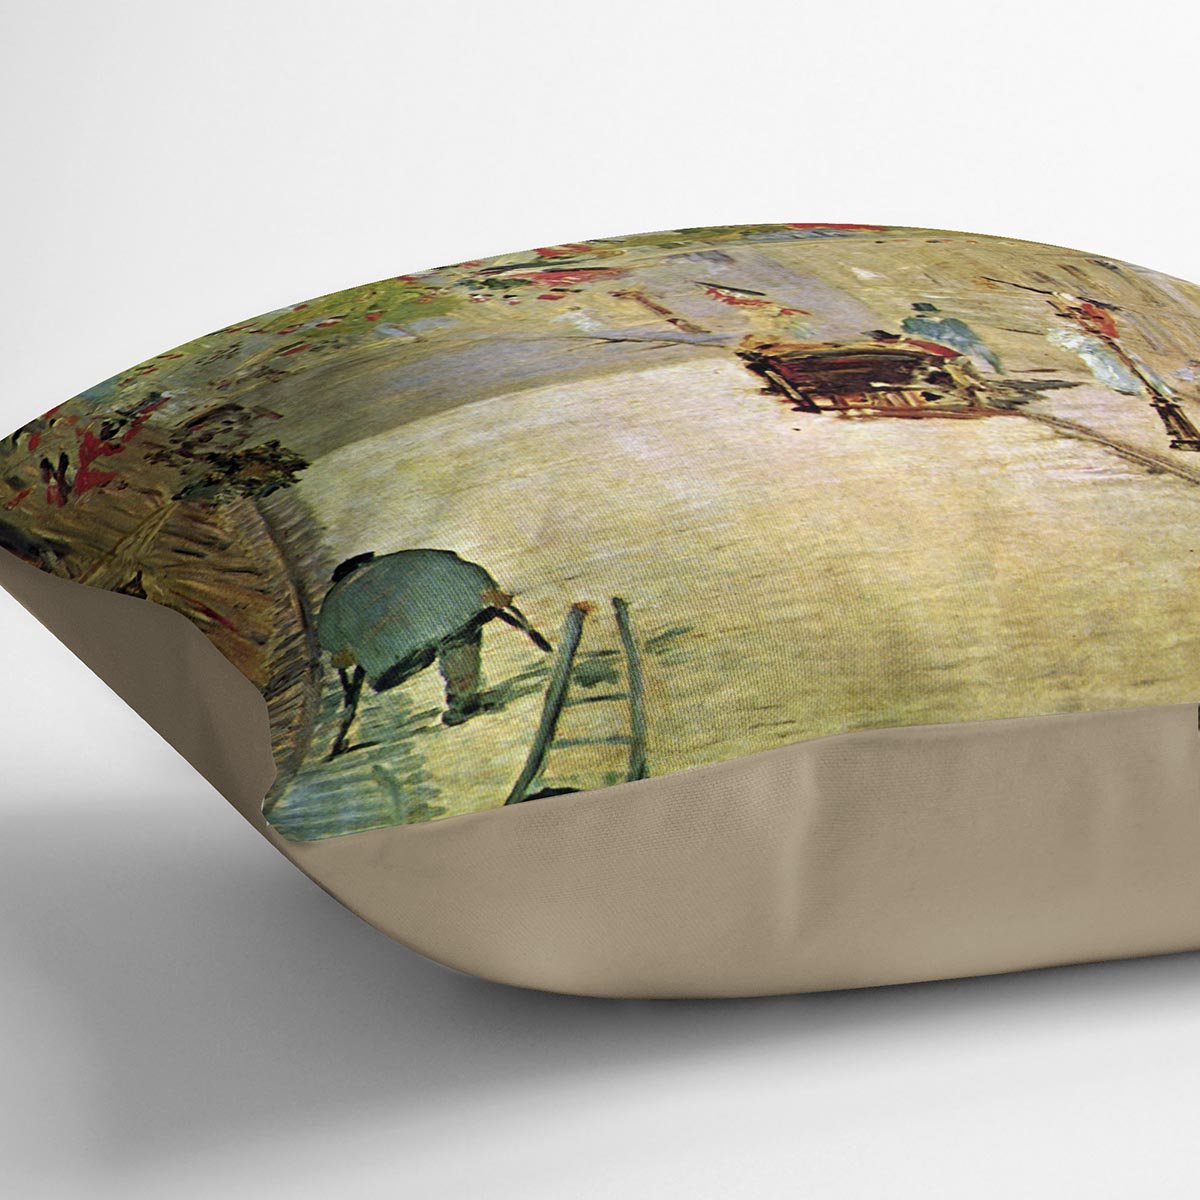 Rue Mosnier with Flags by Manet Throw Pillow